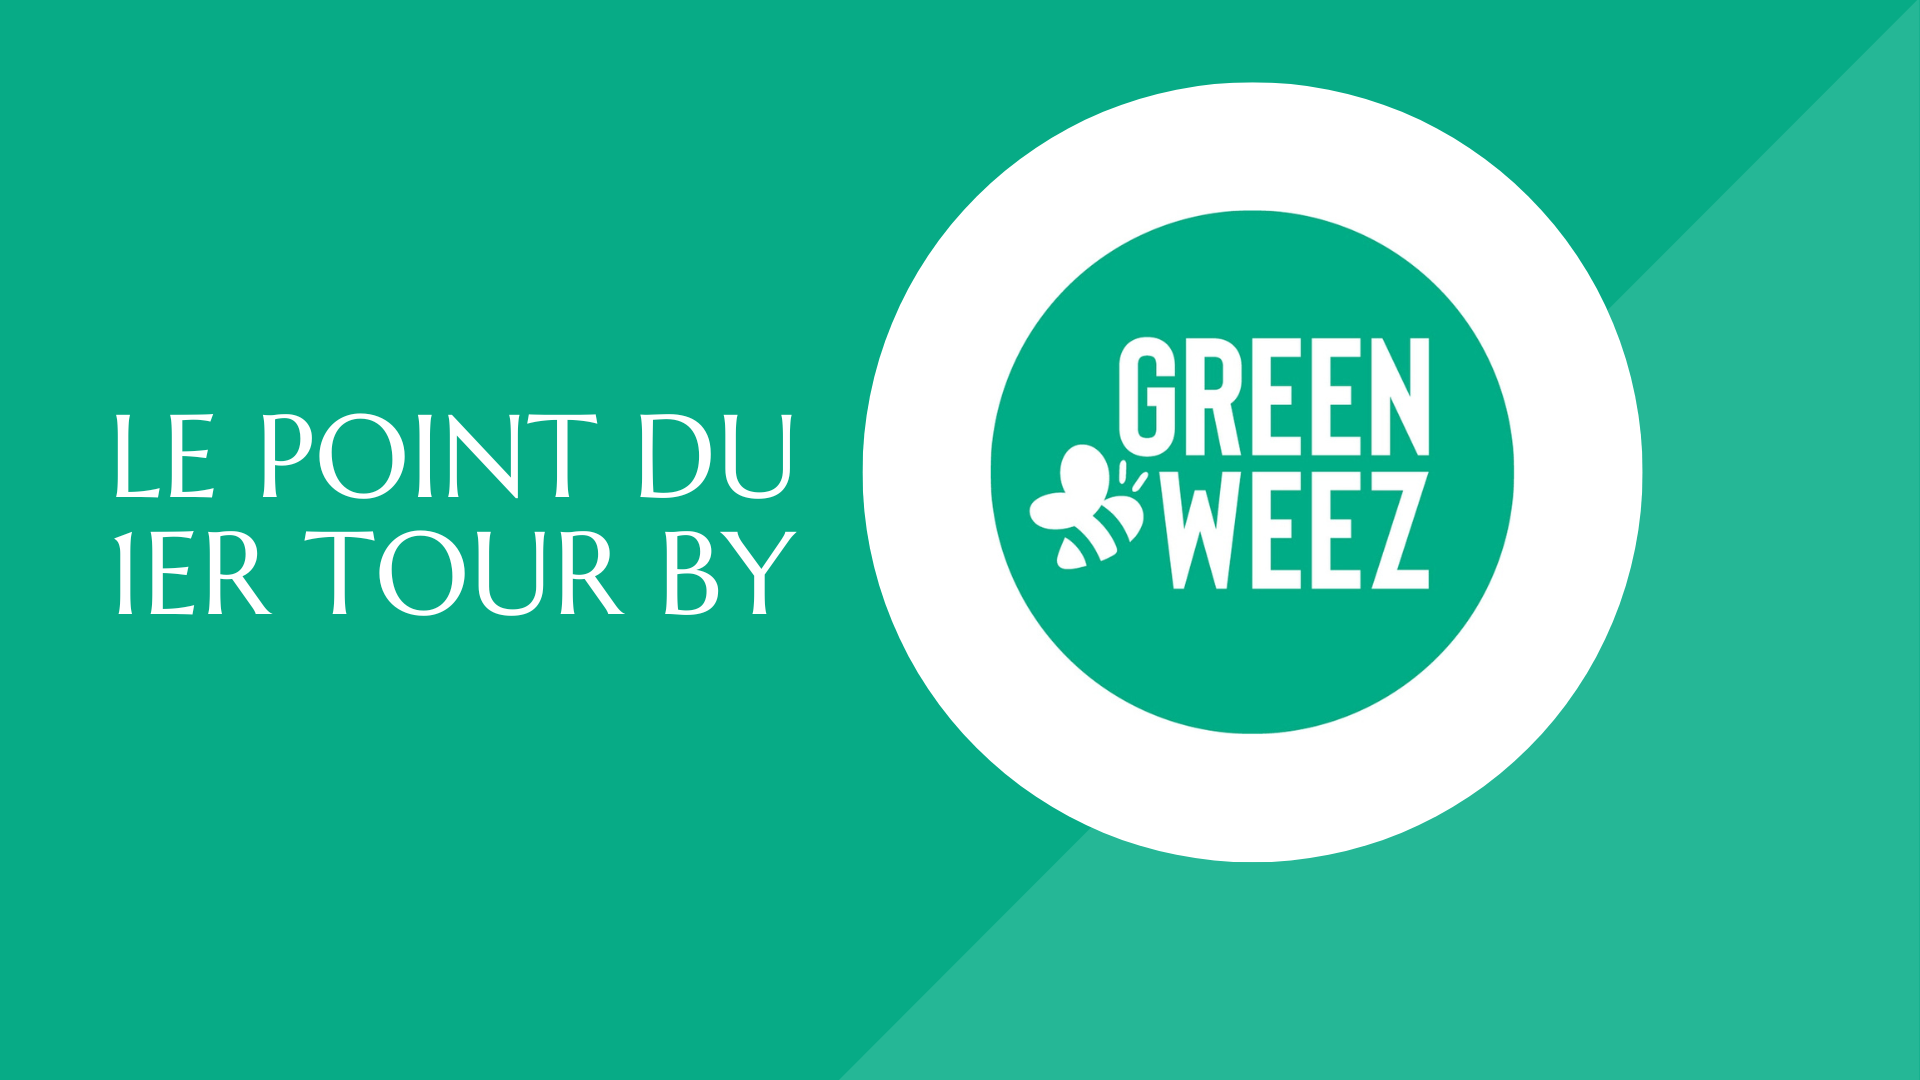 le point du 1er tour by Greenweez